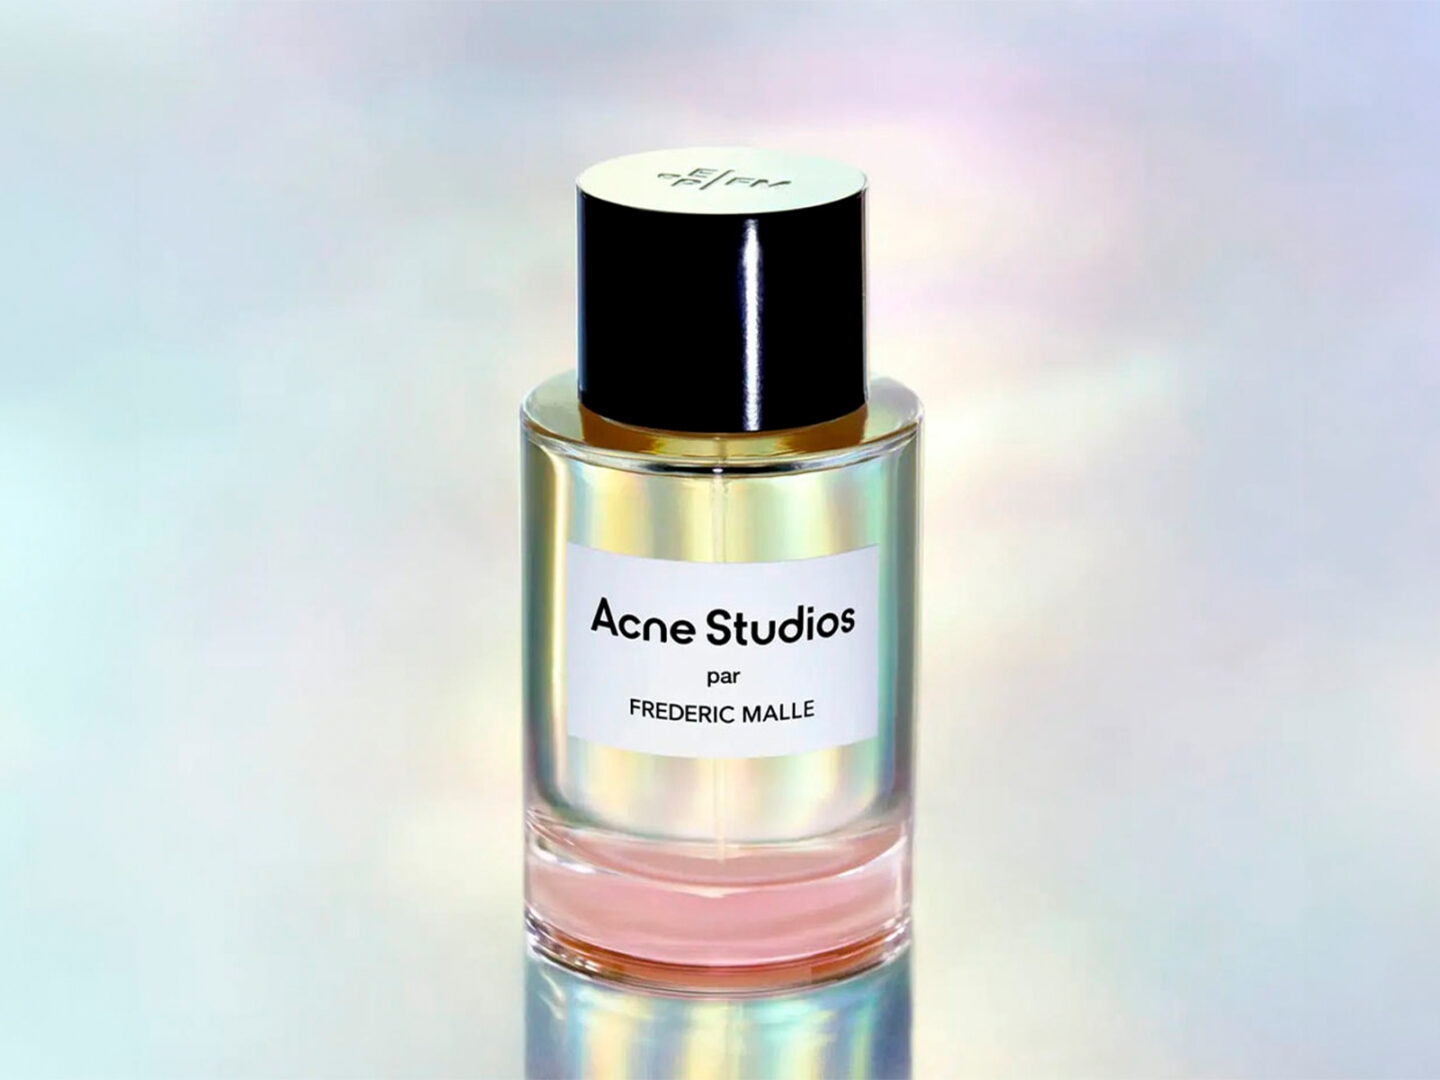 Acne Studios and Frédéric Malle have come up with the scent of the season